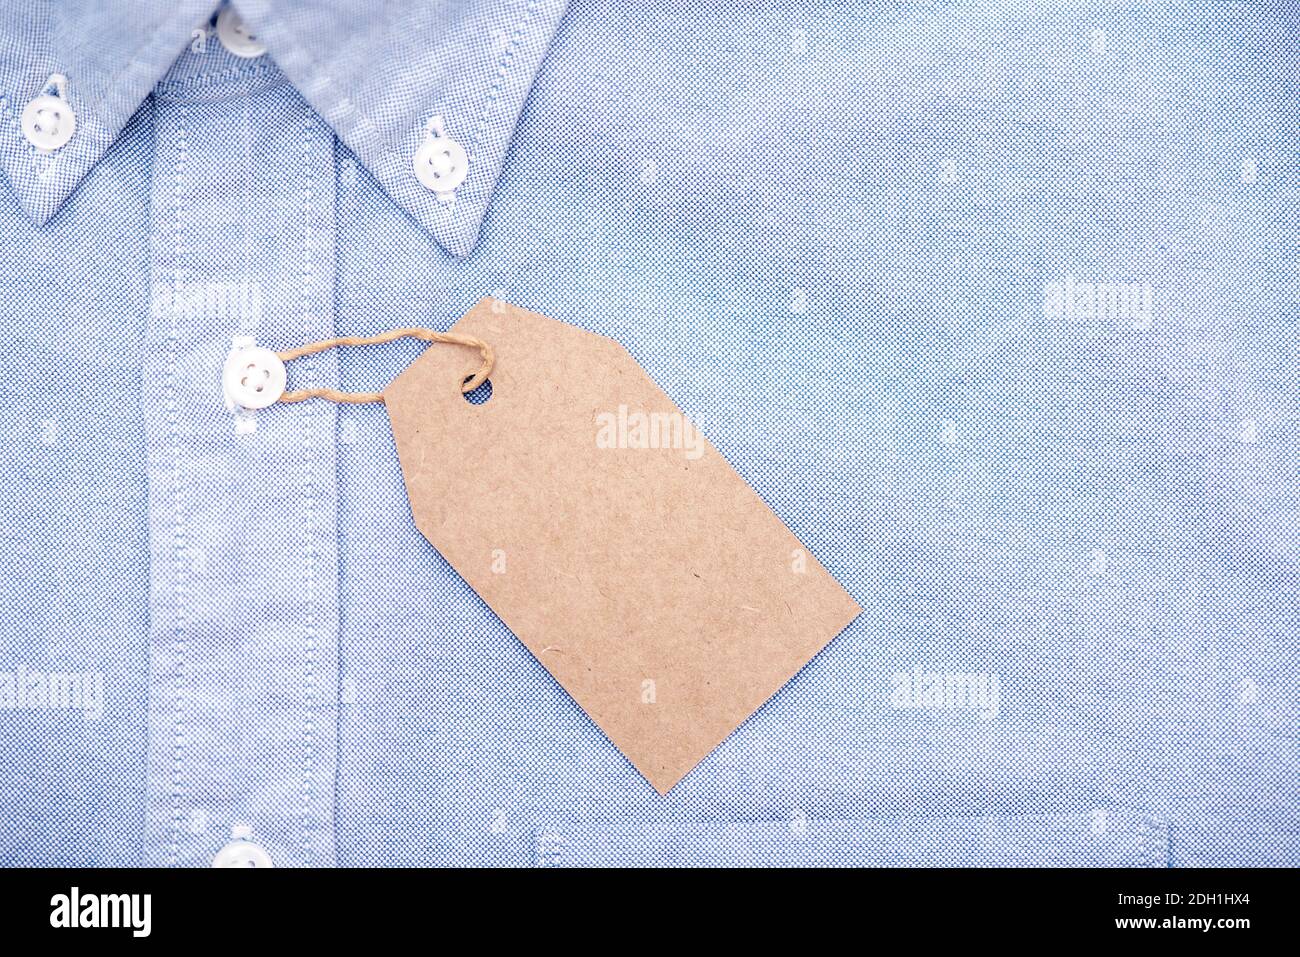 Blank paper label or tag on top of blue shirt, space for text Stock Photo